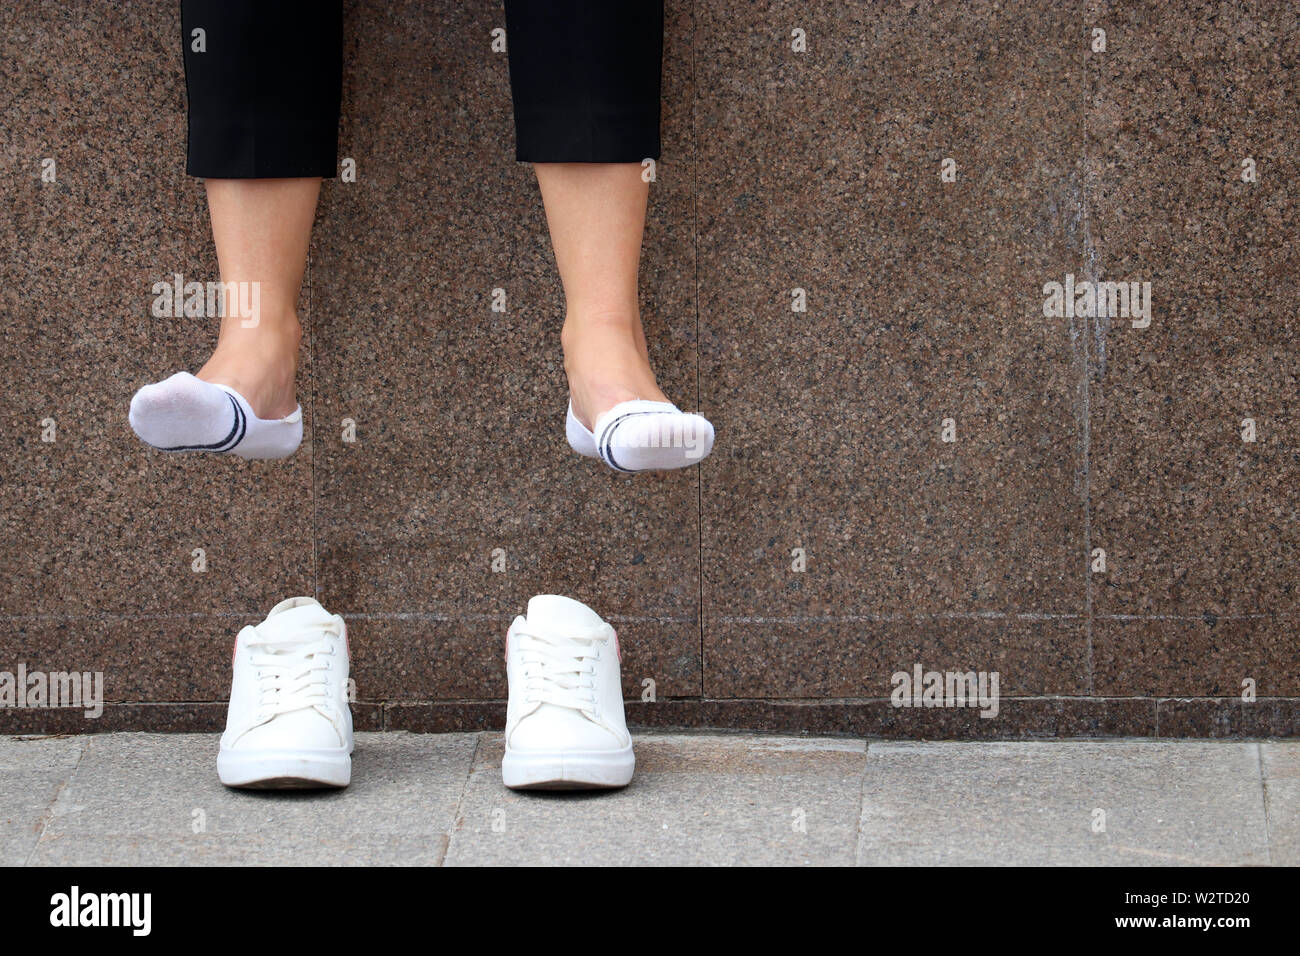 Tired legs, foot pain, barefoot woman with removed white sneakers resting on a street. Female legs in white socks dangling over shoes Stock Photo